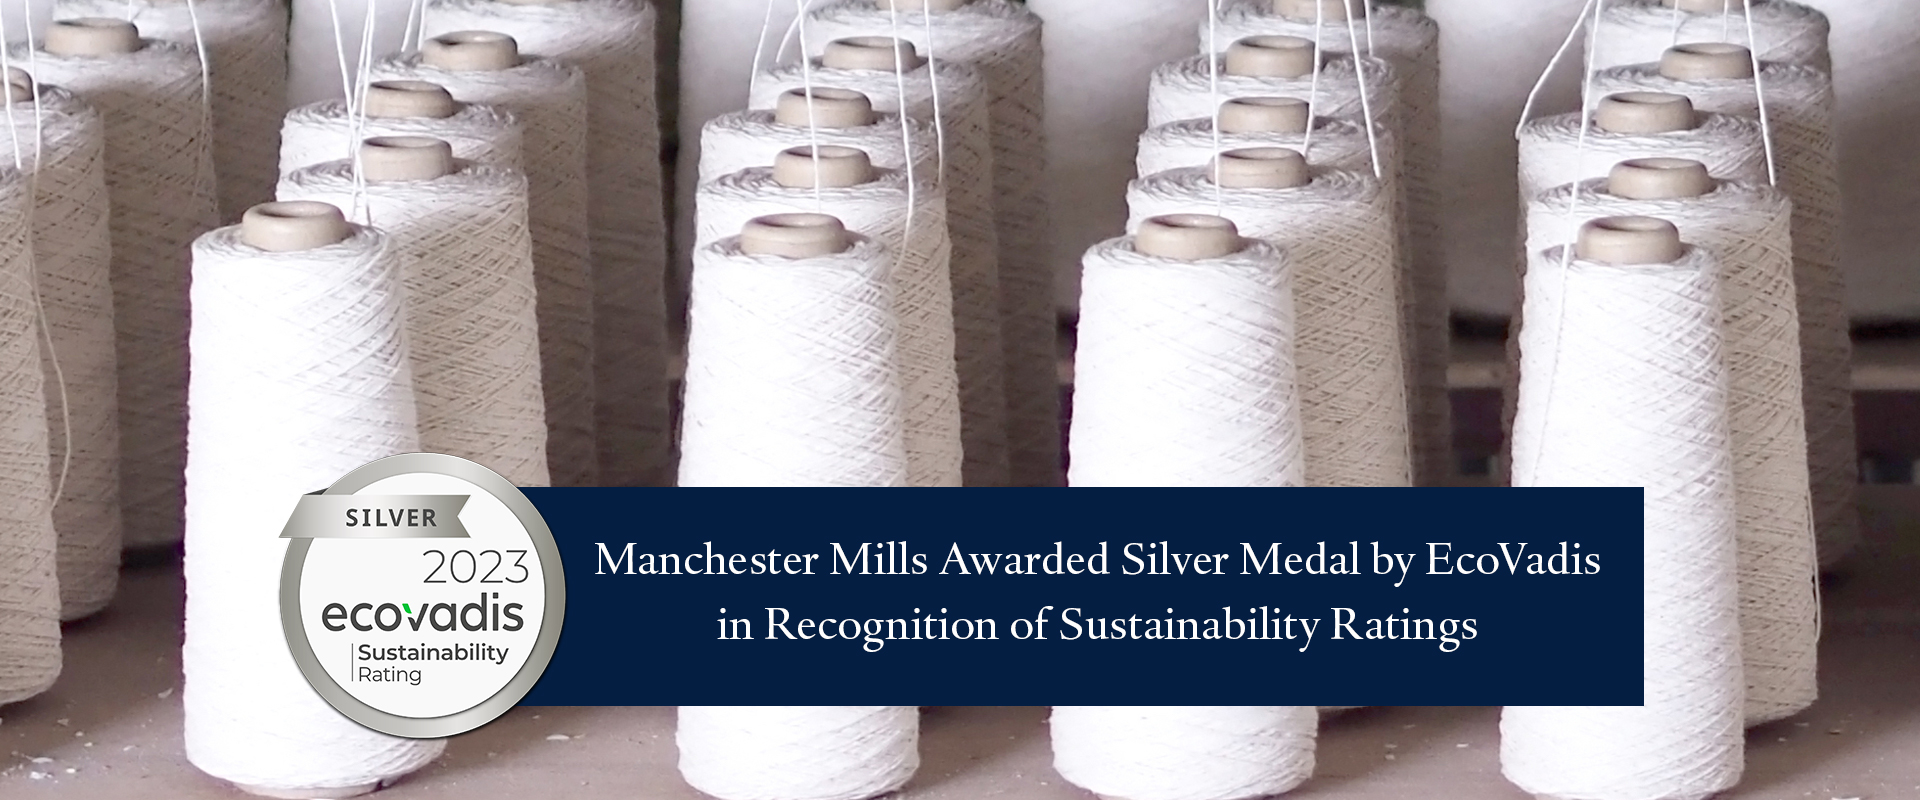 Manchester Mills awarded the Silver Medal by EcoVadis